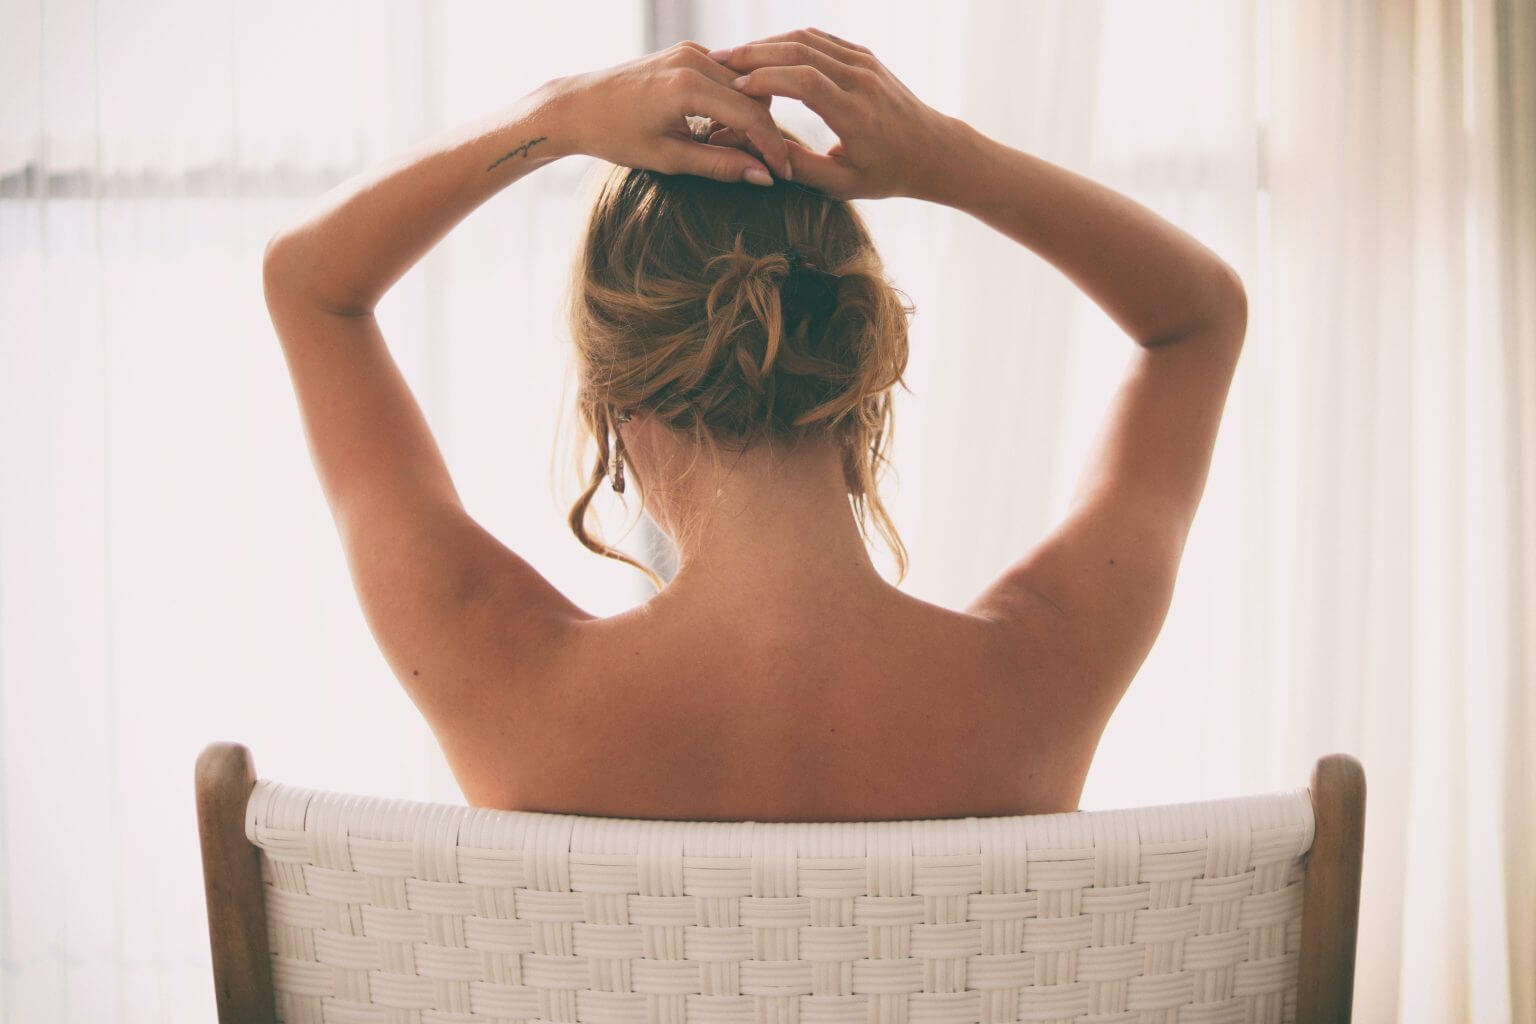 What’s Bacne(back Acne)? How To Get Rid Of It Naturally?